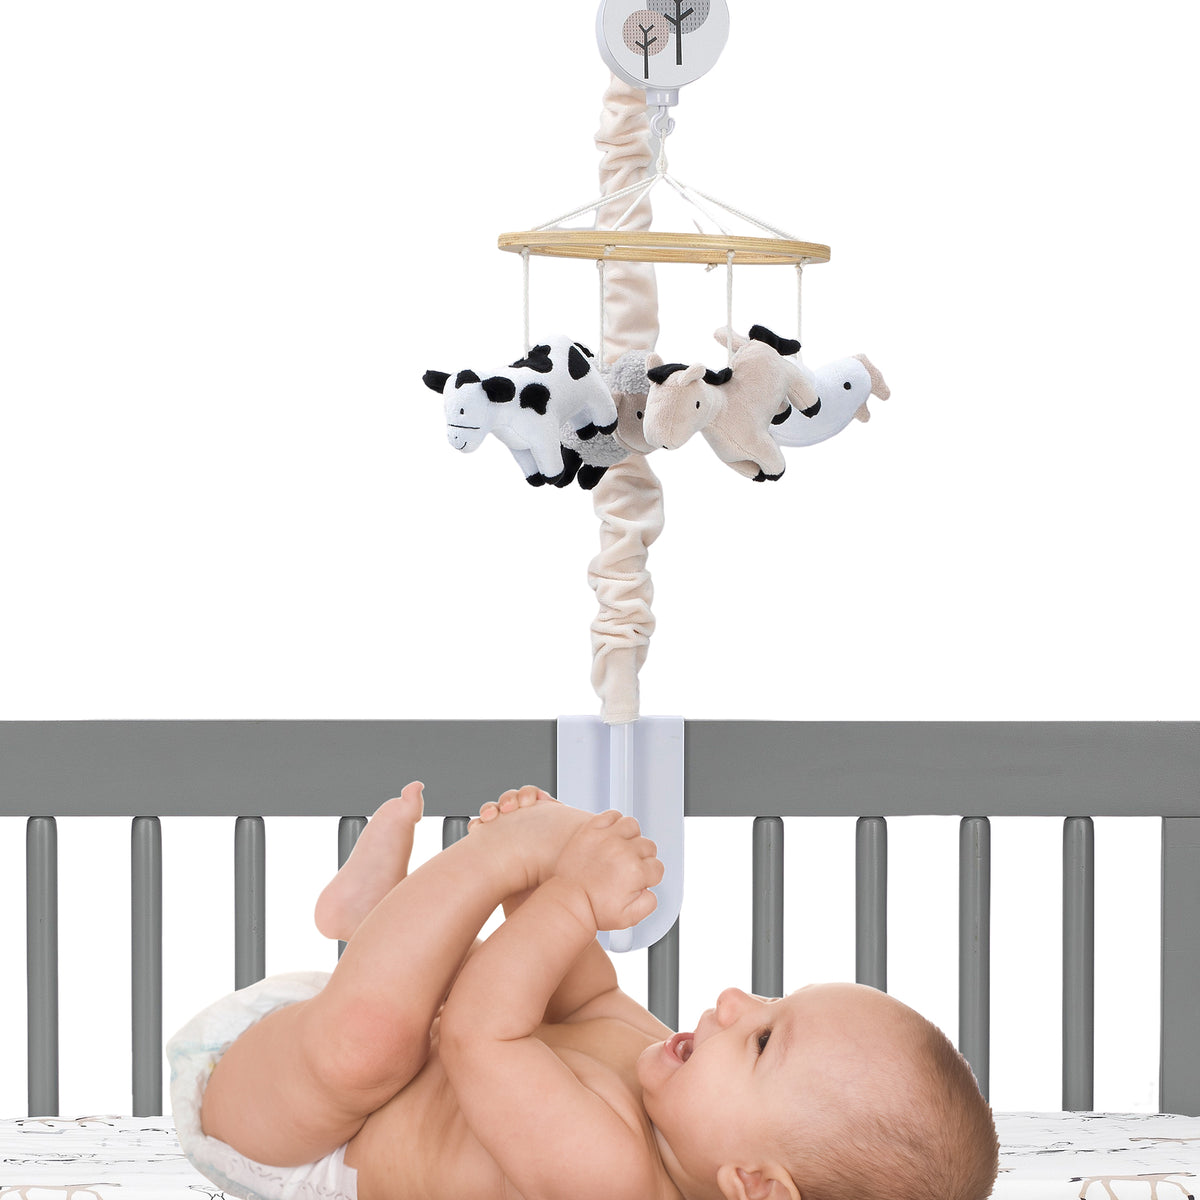 Baby Mobile for Changing Table and Baby Bed With Sleeping Bear